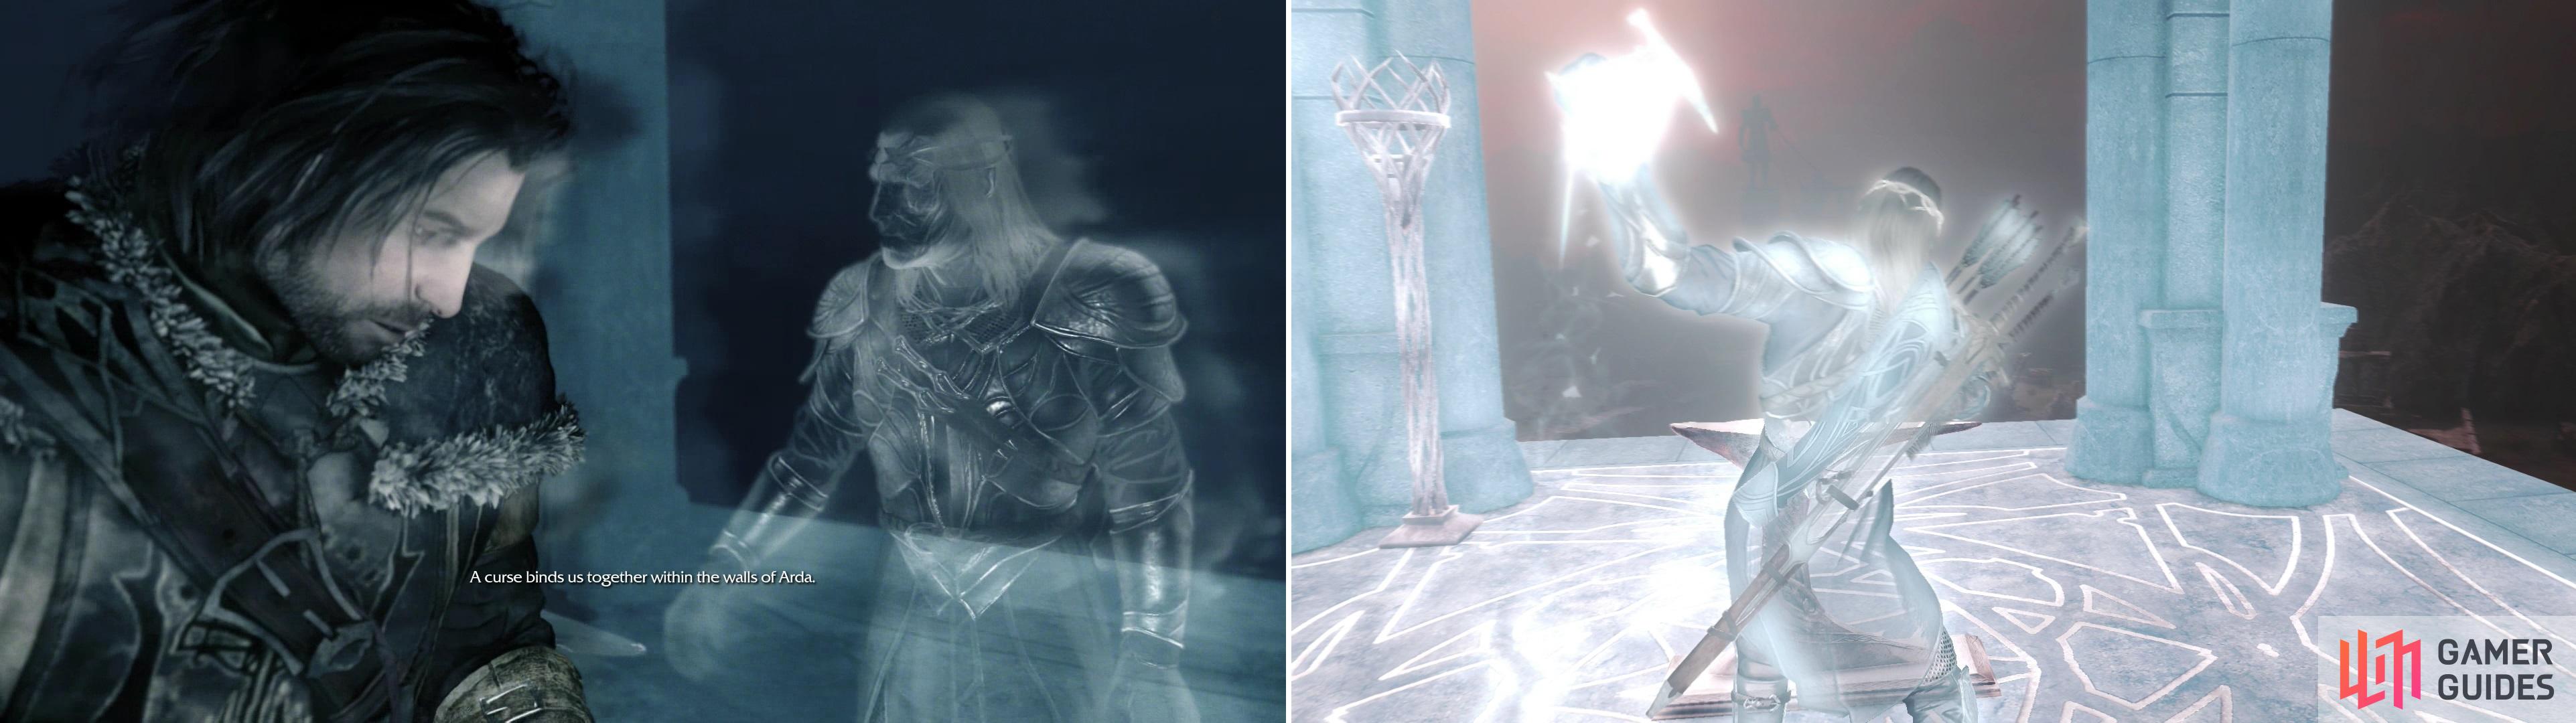 After the ritual, you’ll find yourself lost in Mordor, and bound to an Elven Wraith (left). Reforge the Forge Tower to gain information about the surrounding area (right).